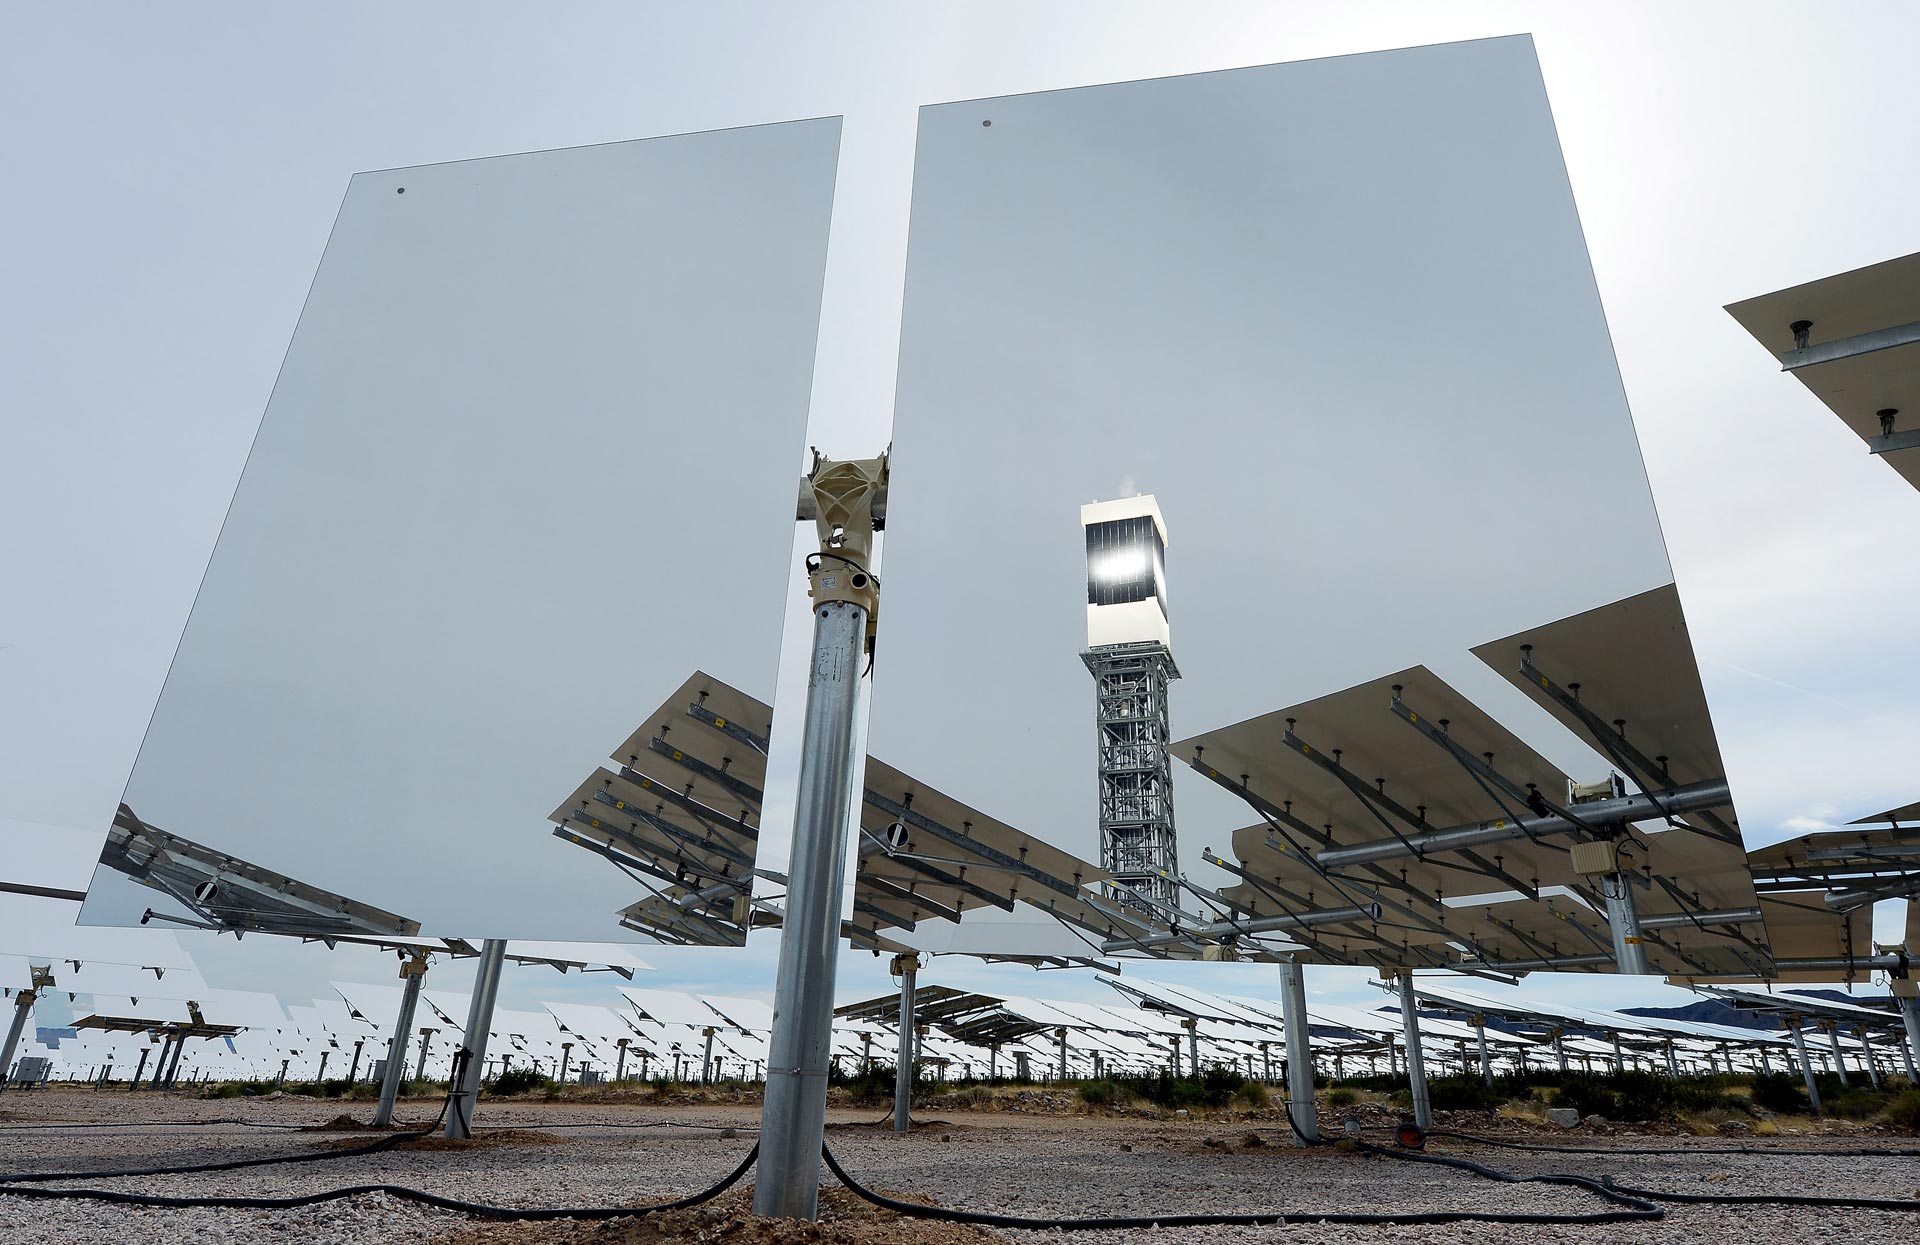 A solar receiver and boiler on top of a tower is reflected in a heliostat with two mirrors at the Ivanpah Solar Electric Generating System.